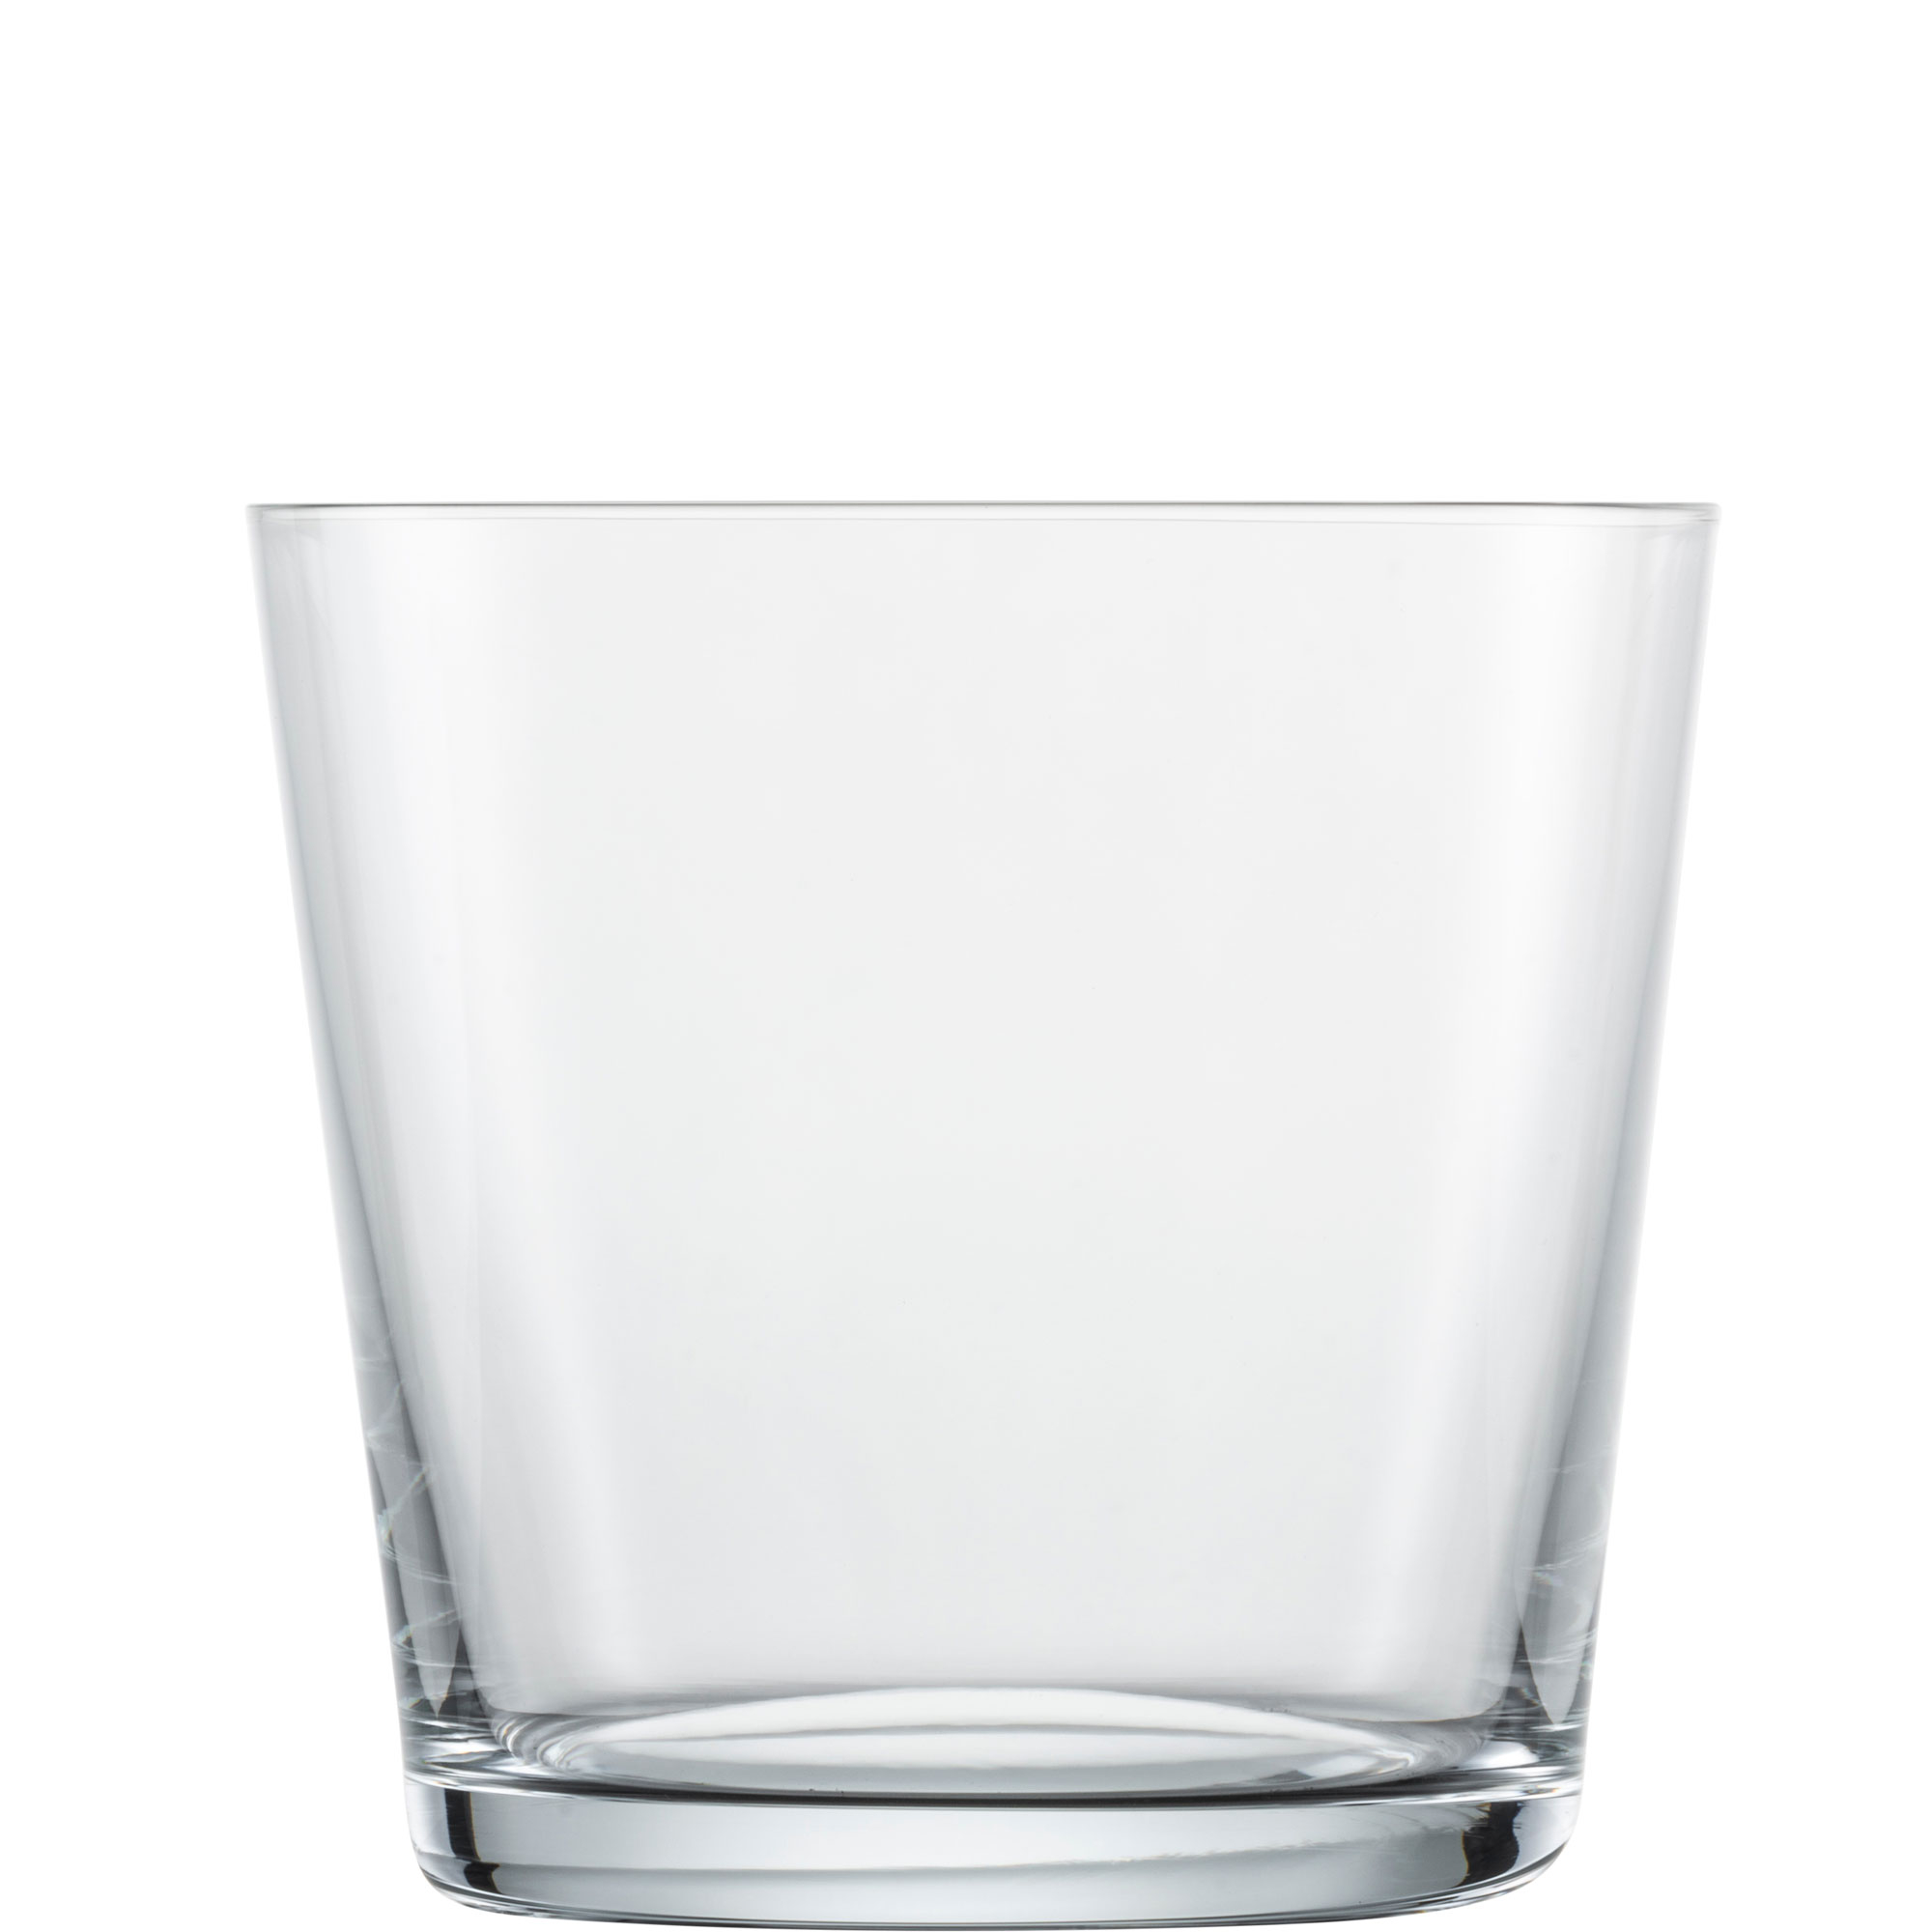 Water glass Sonido crystal, Zwiesel Gals - 367ml (1 pc.)